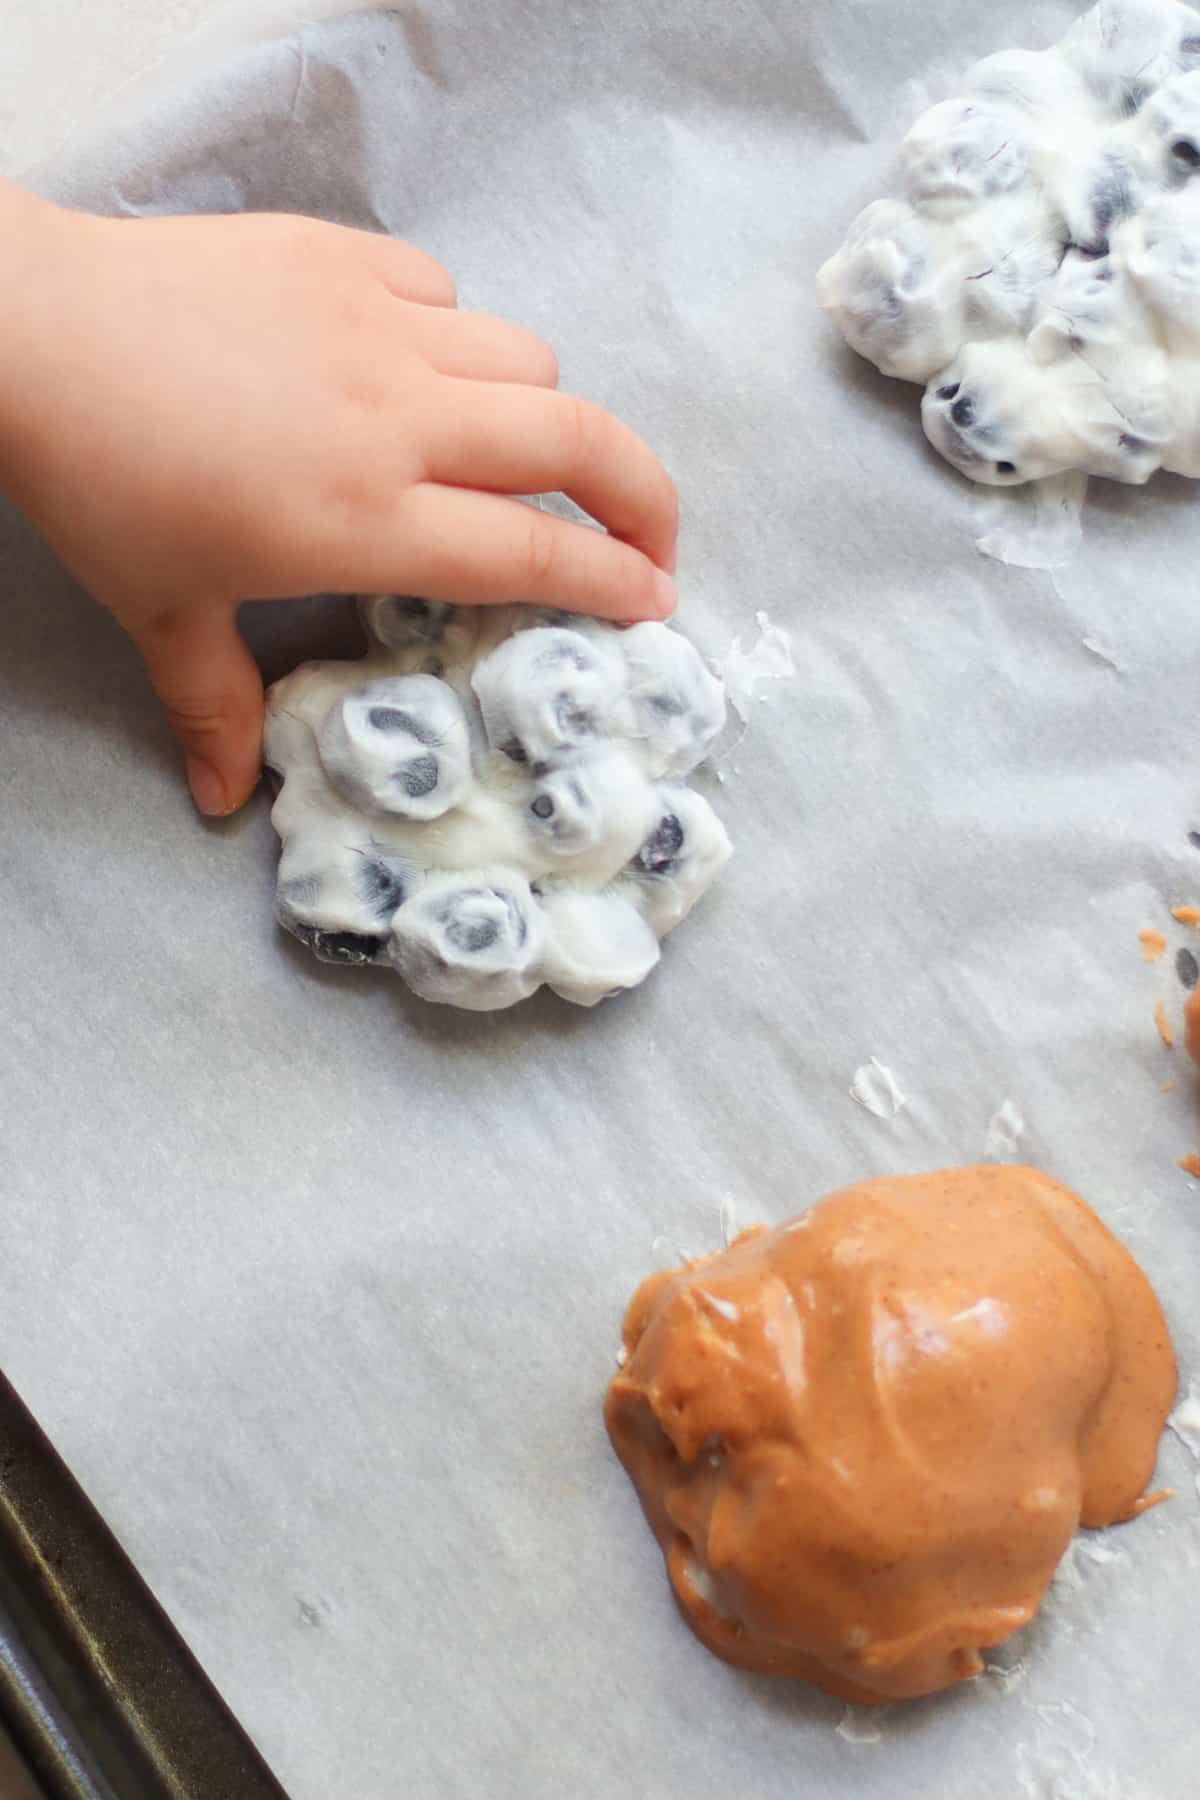 Frozen yogurt covered blueberries with toddler's hand.